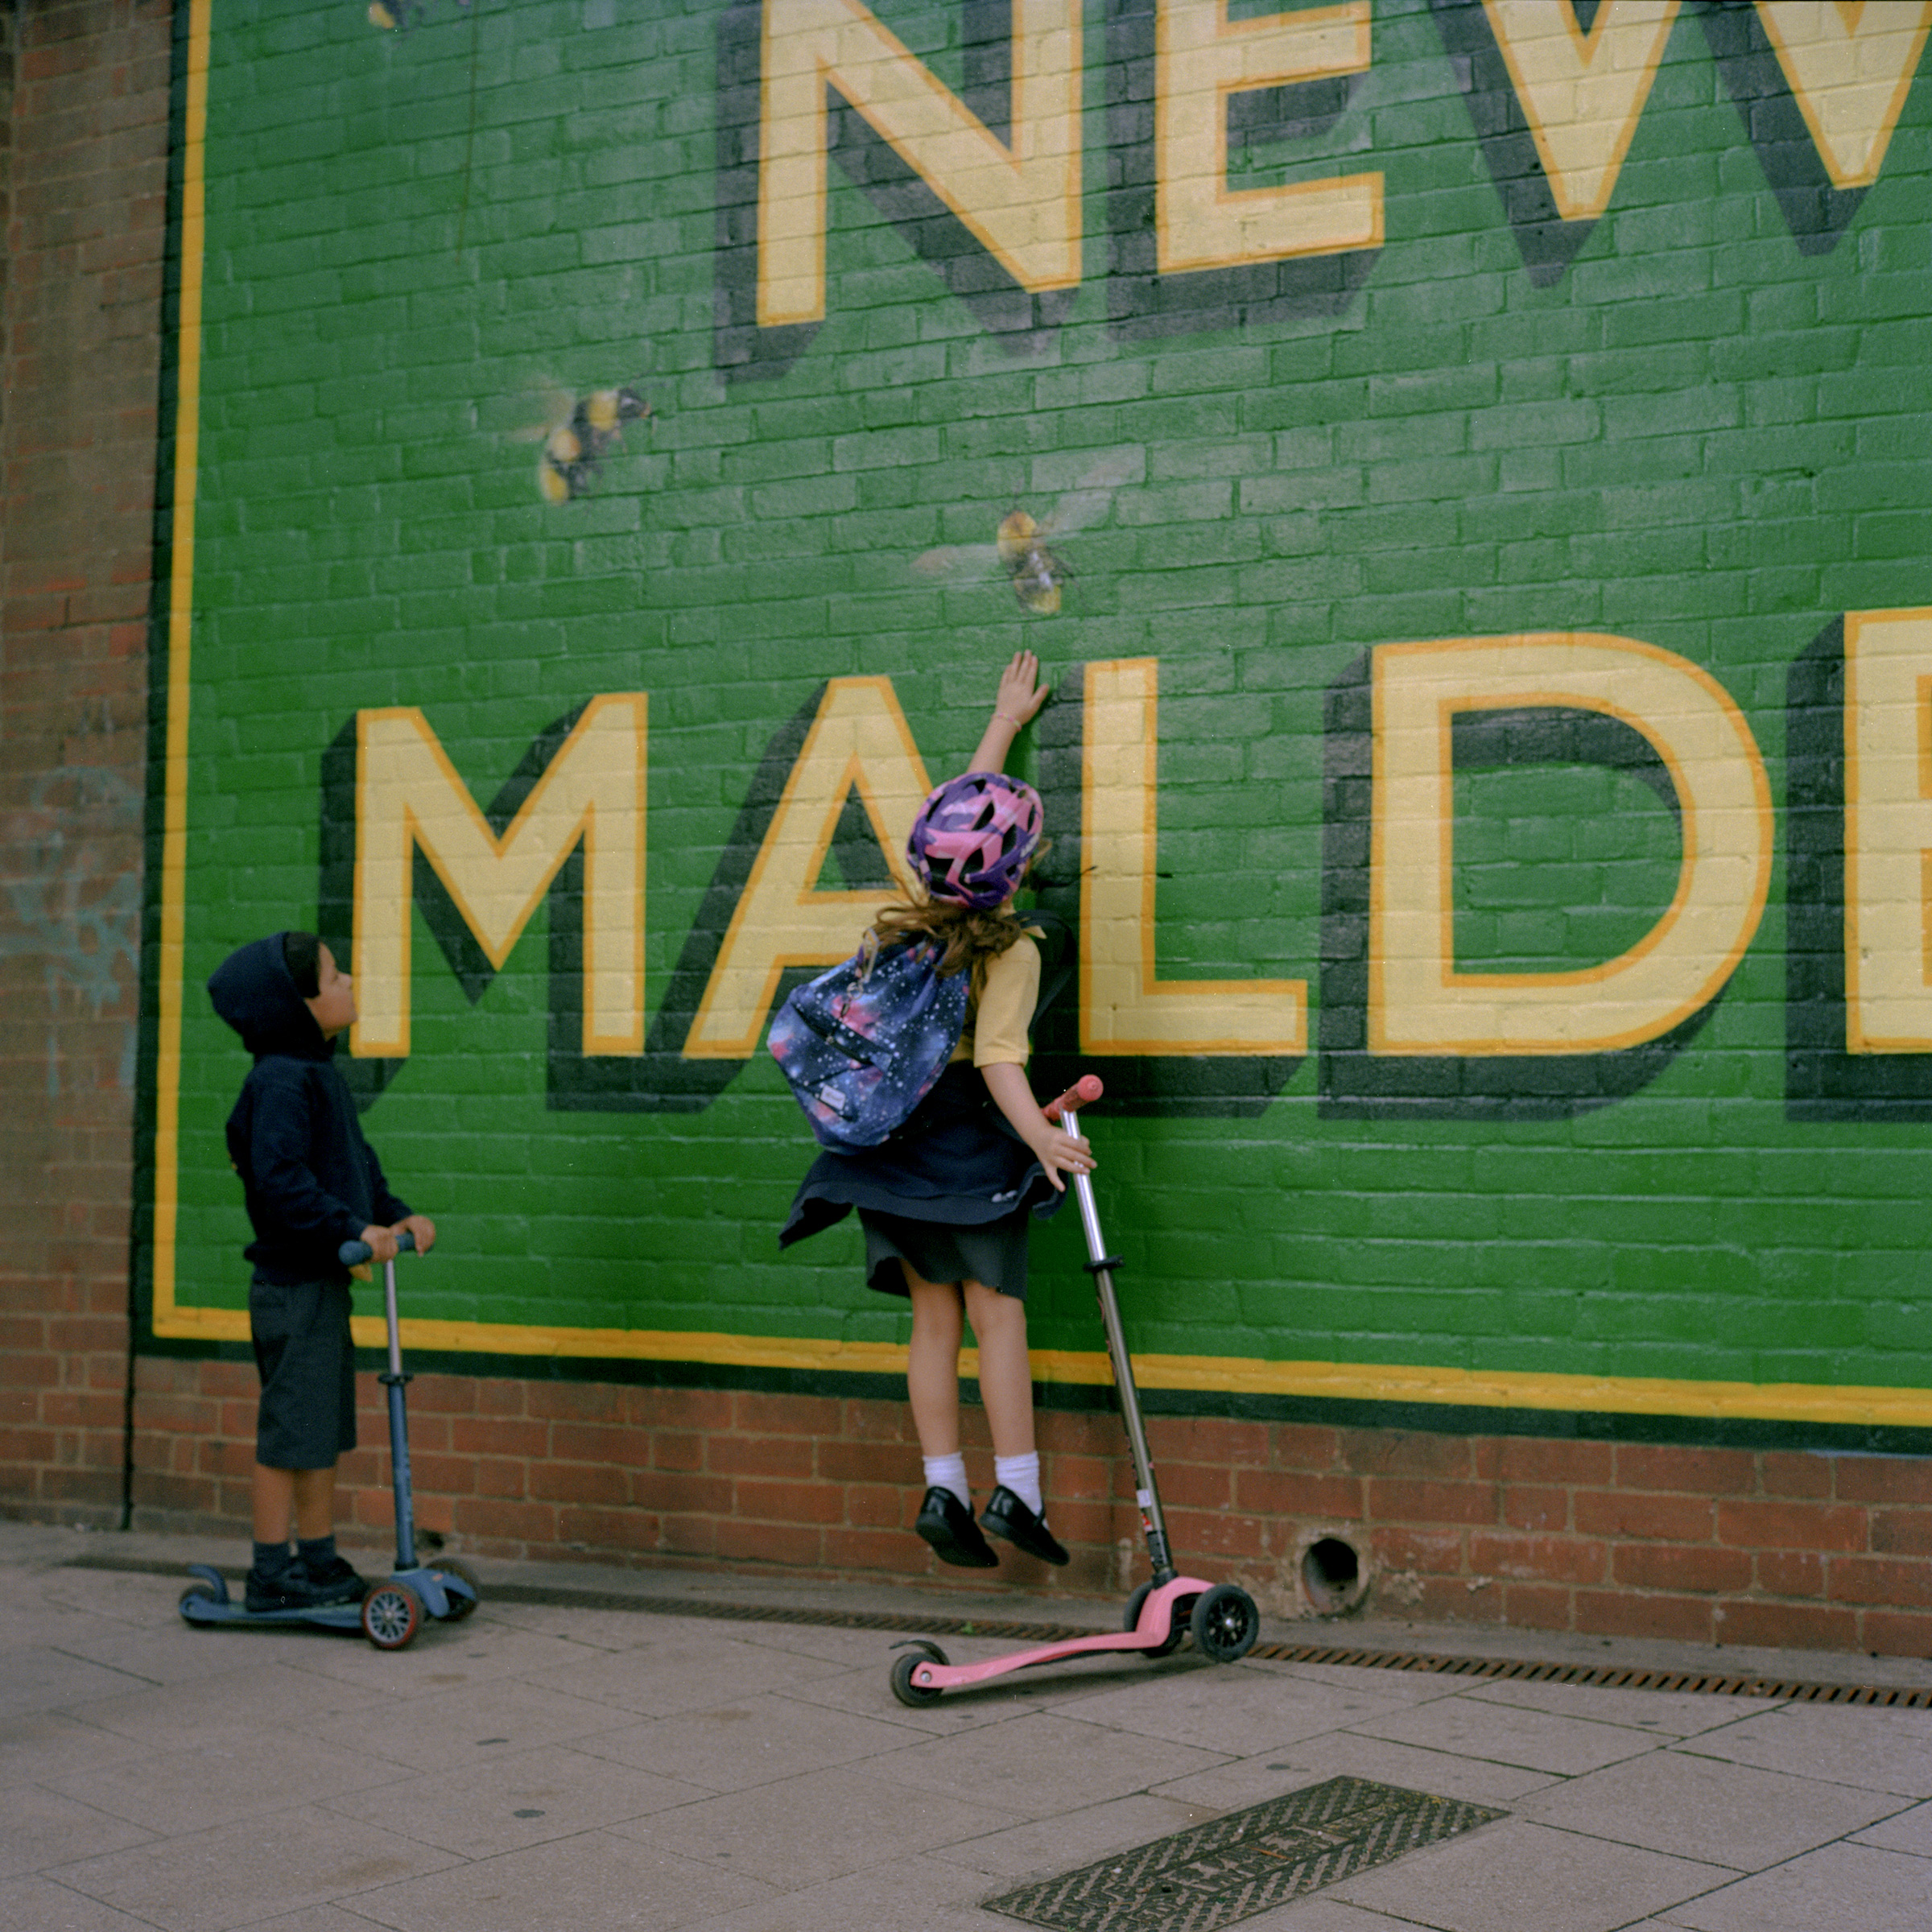 Two children play in front of a mural outside New Malden train station. (Michael Vince Kim for TIME)